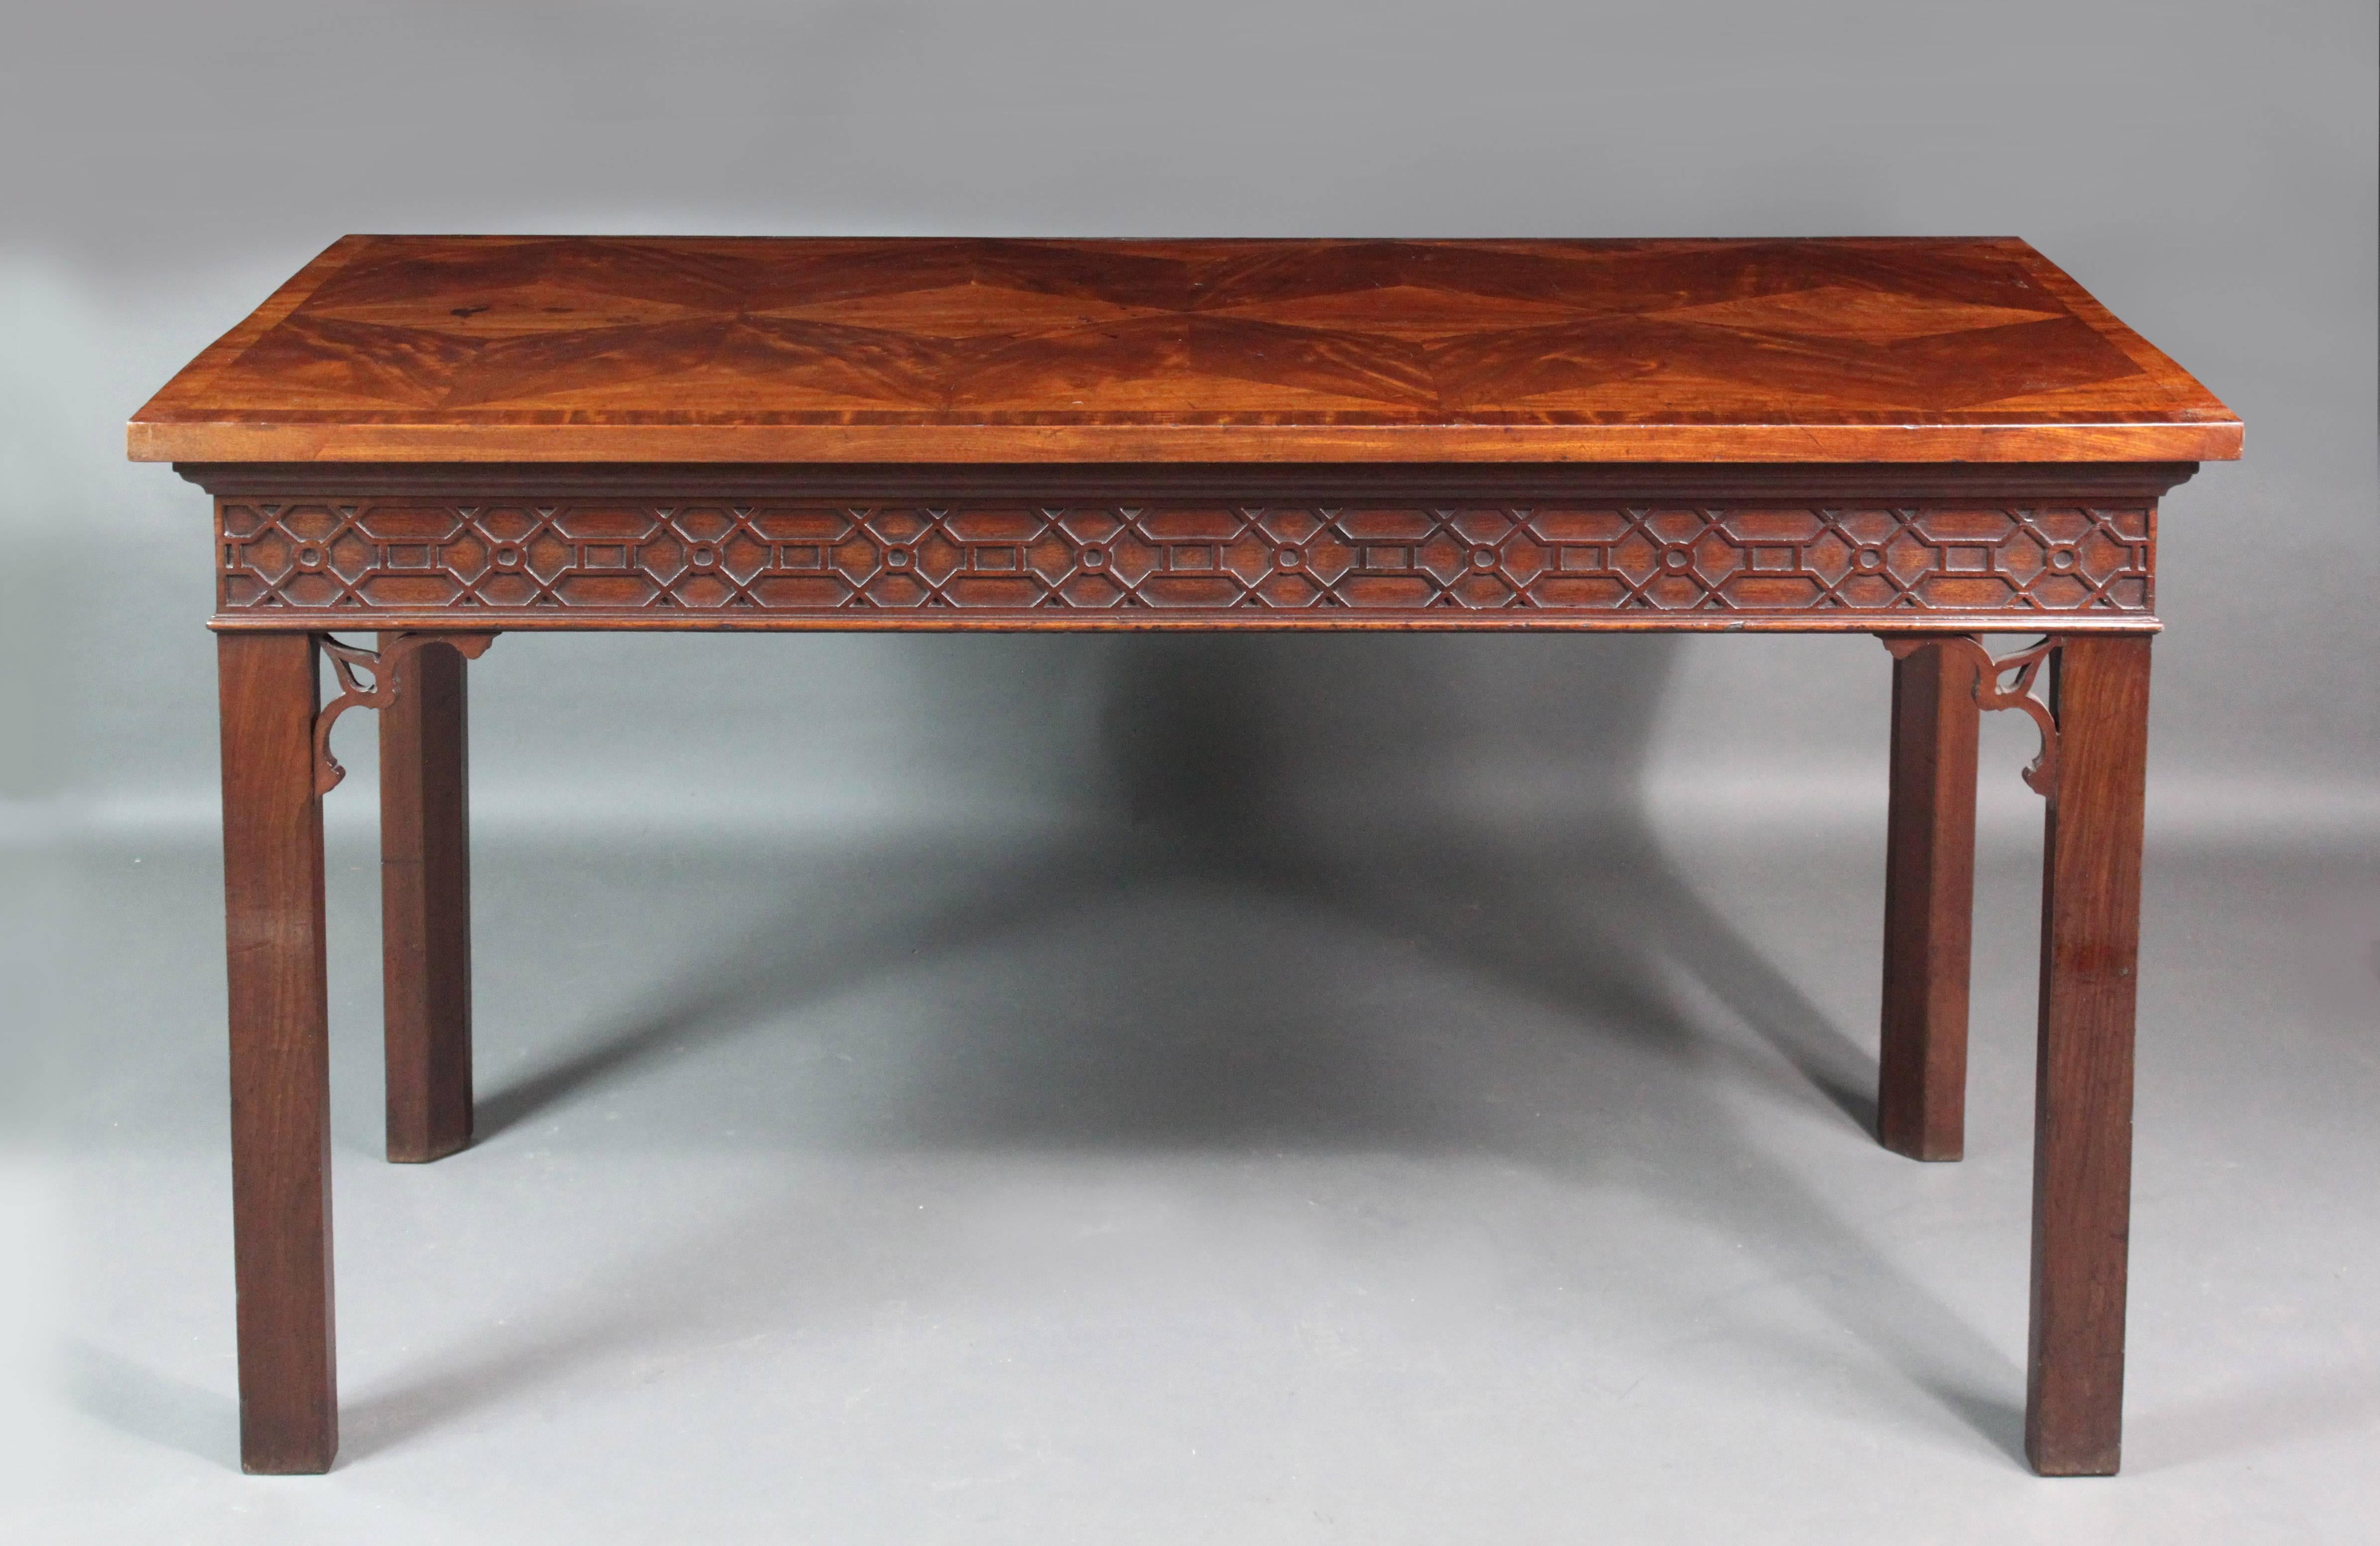 A fine George III Chippendale period mahogany side table with superb parquetry top, the frieze carved with blind fret, good original color and condition.